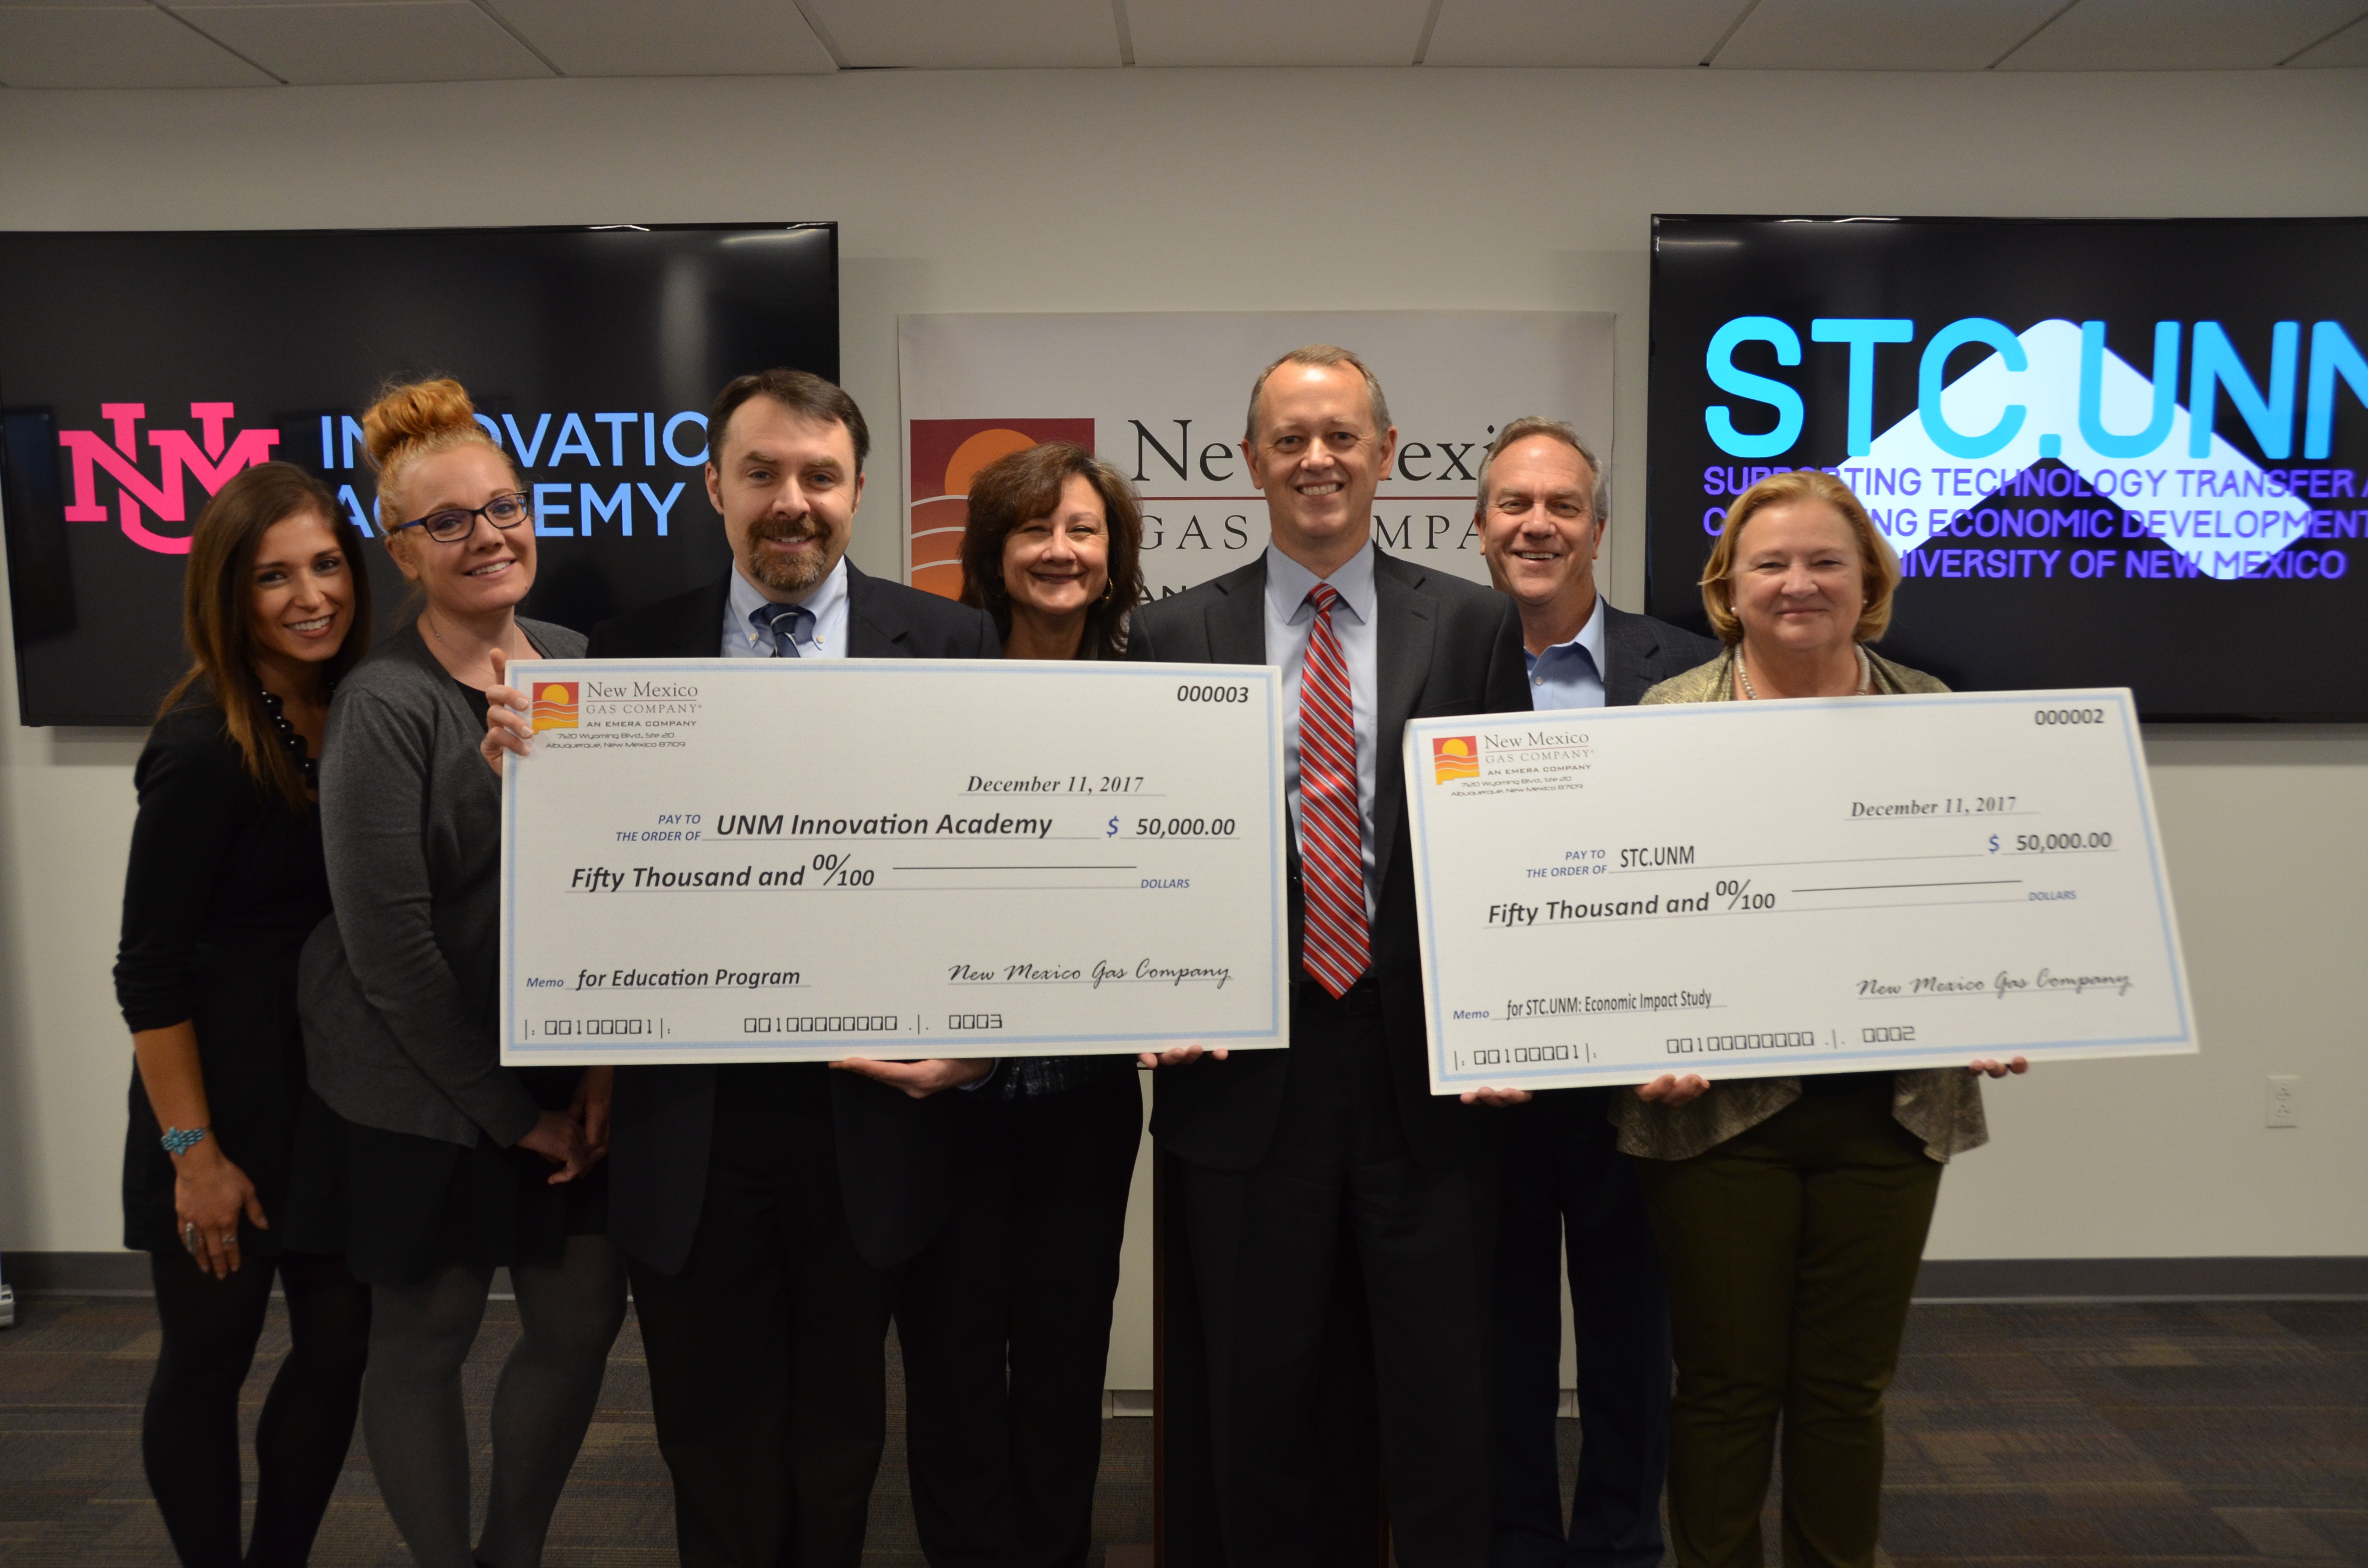 UNM's Innovation Academy and STC.UNM's grant.